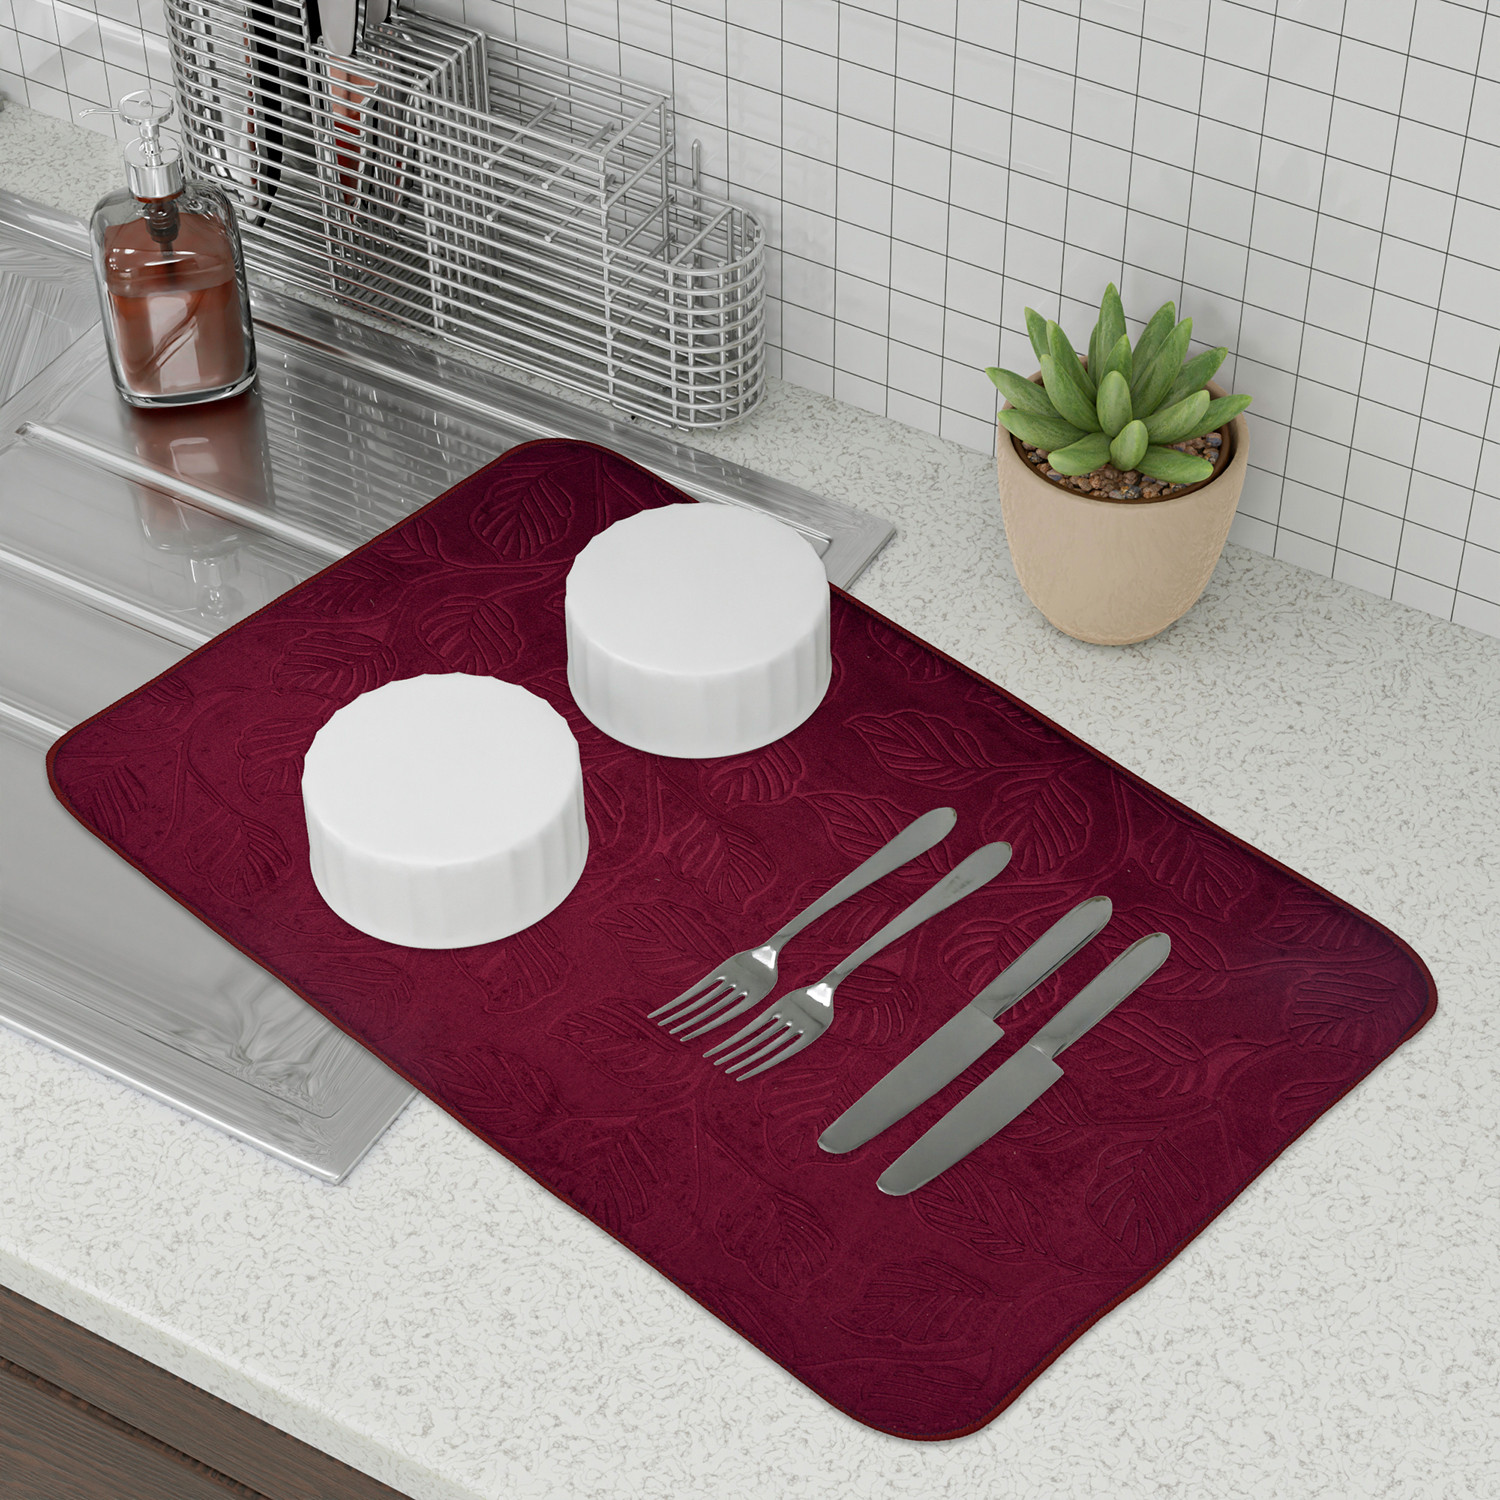 Kuber Industries Dish Dry Mat | Microfiber Self Drying Mat | Kitchen Drying Mat | Water Absorbent Kitchen Mat | Embossed Dish Dry Mat | 50x70 | Pack of 2 | Maroon & Gray